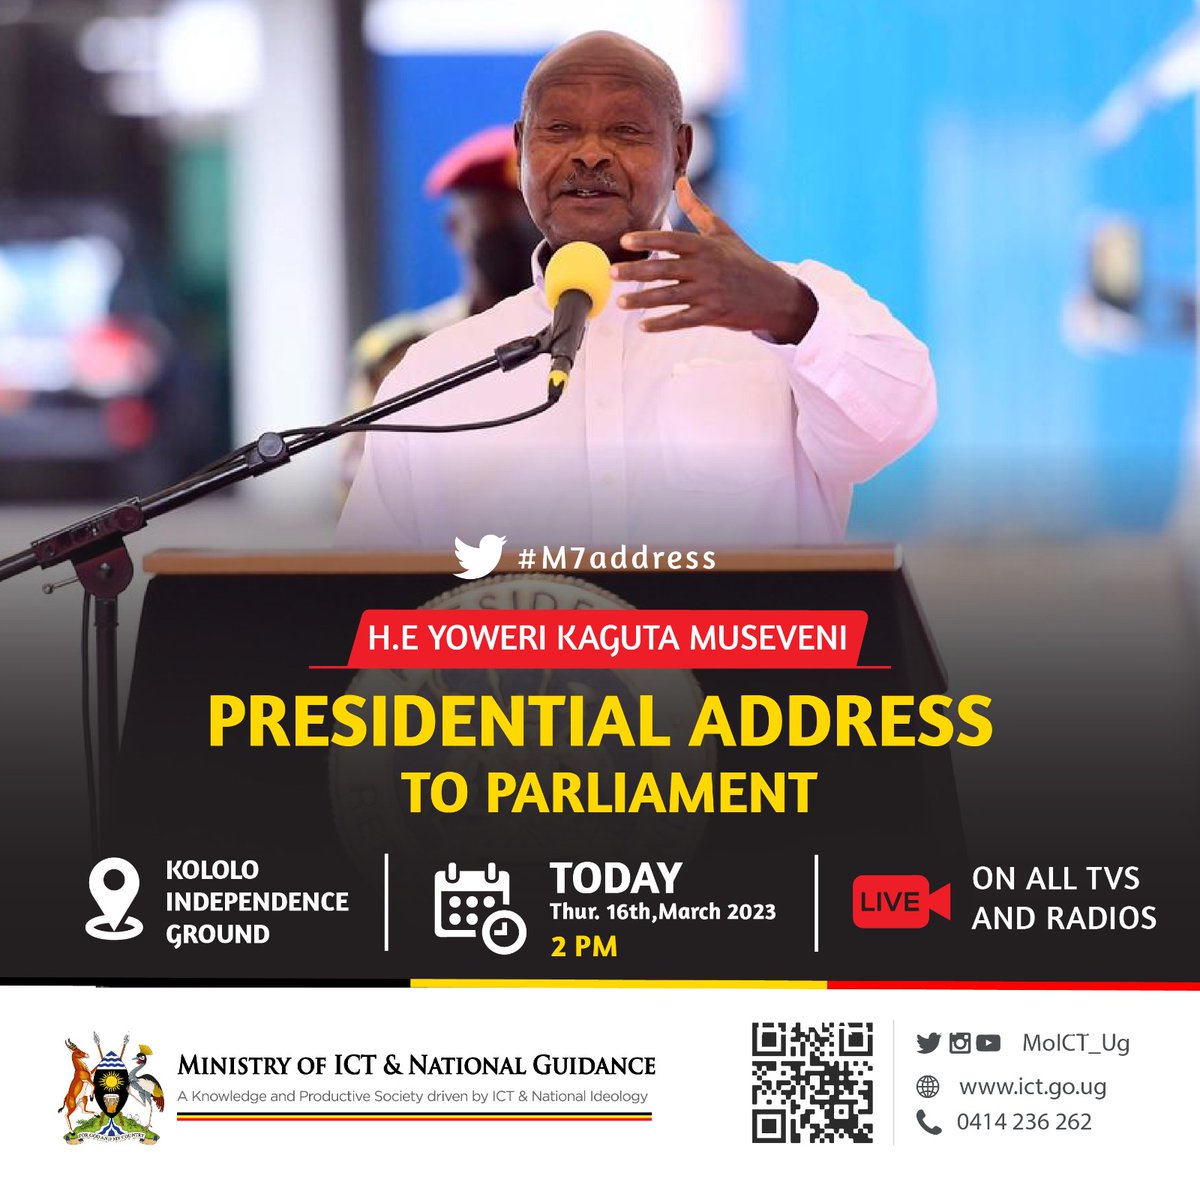 At exactly 2pm,tune in for the presidential address to Parliament.

Live on all Tvs and Radio stations.
#M7address @PresidencyUg @GovUganda @KagutaMuseveni